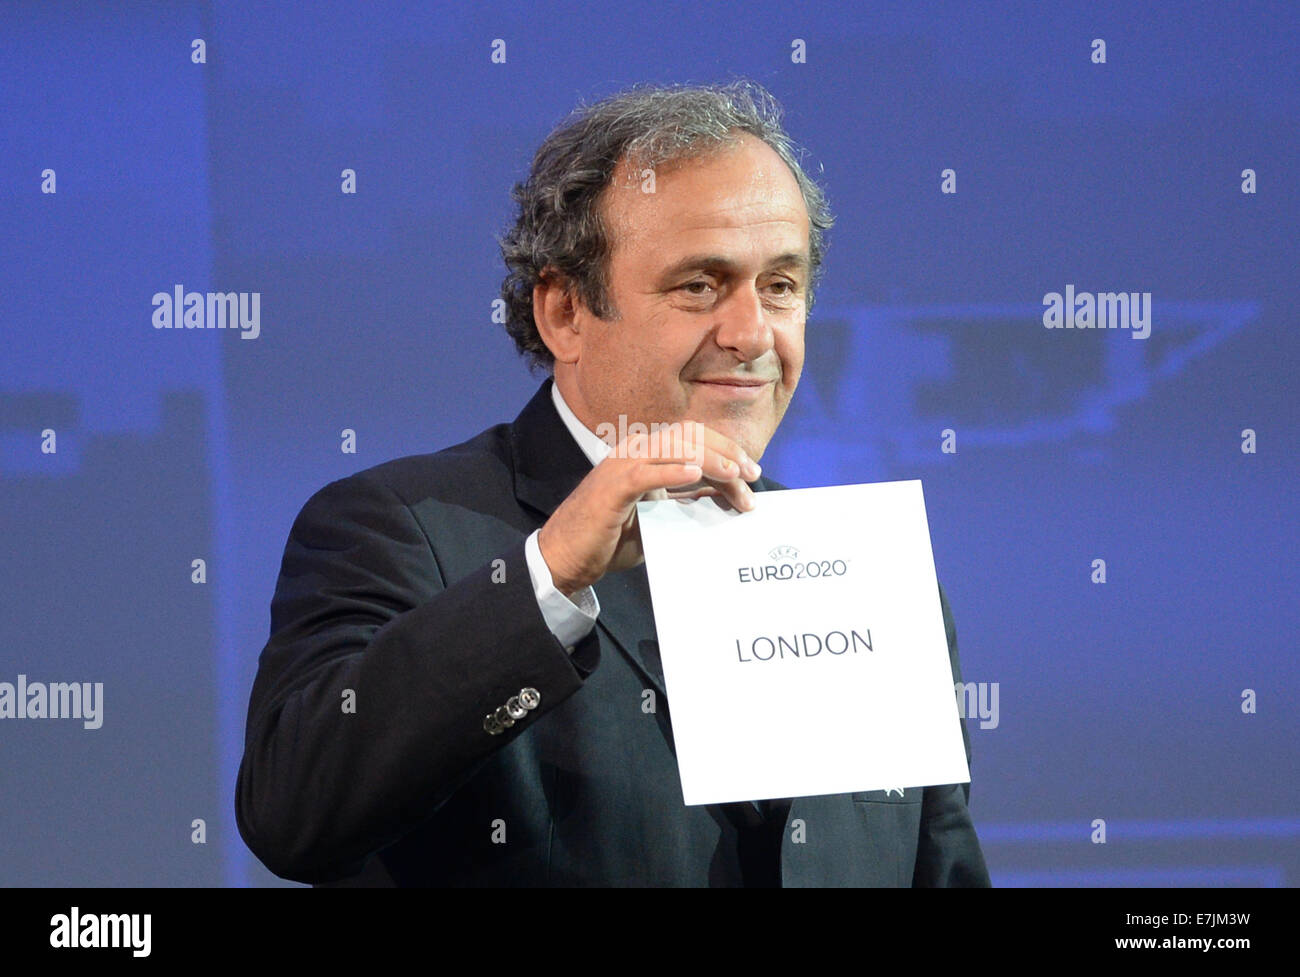 Geneva, Switzerland. 19th Sep, 2014.  UEFA President Michel Platini announces that London will stage the Final of UEFA Euro 2020 European soccer championships during the UEFA Euro 2020 Hosts Announcement Ceremony at the Espace Hippomene in Geneva, Switzerland, 19 September 2014. Credit:  dpa picture alliance/Alamy Live News Stock Photo